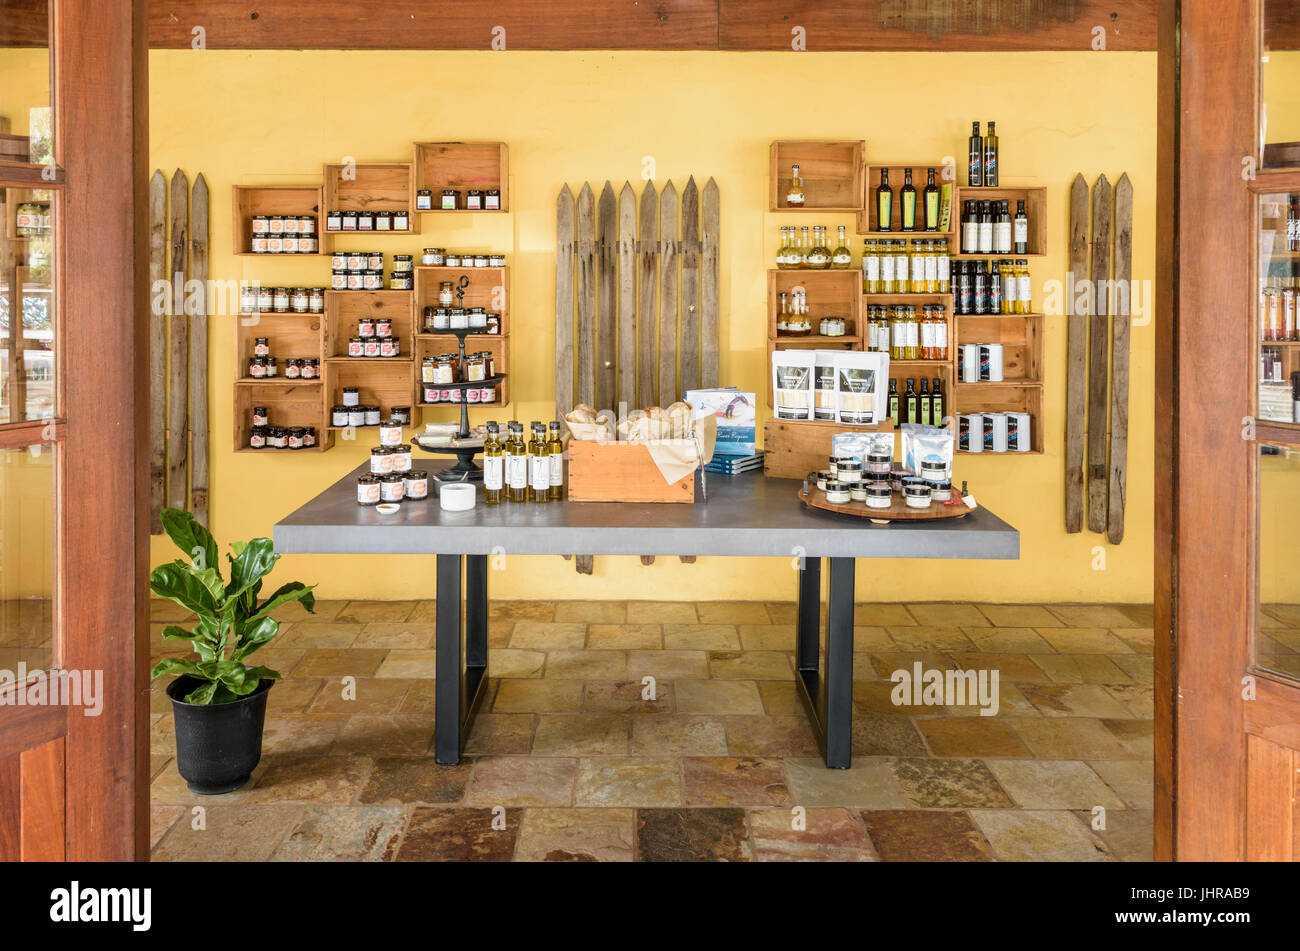 Detail of the Gourmet Food Merchant store in the country town of Cowaramup, Western Australia Stock Photo